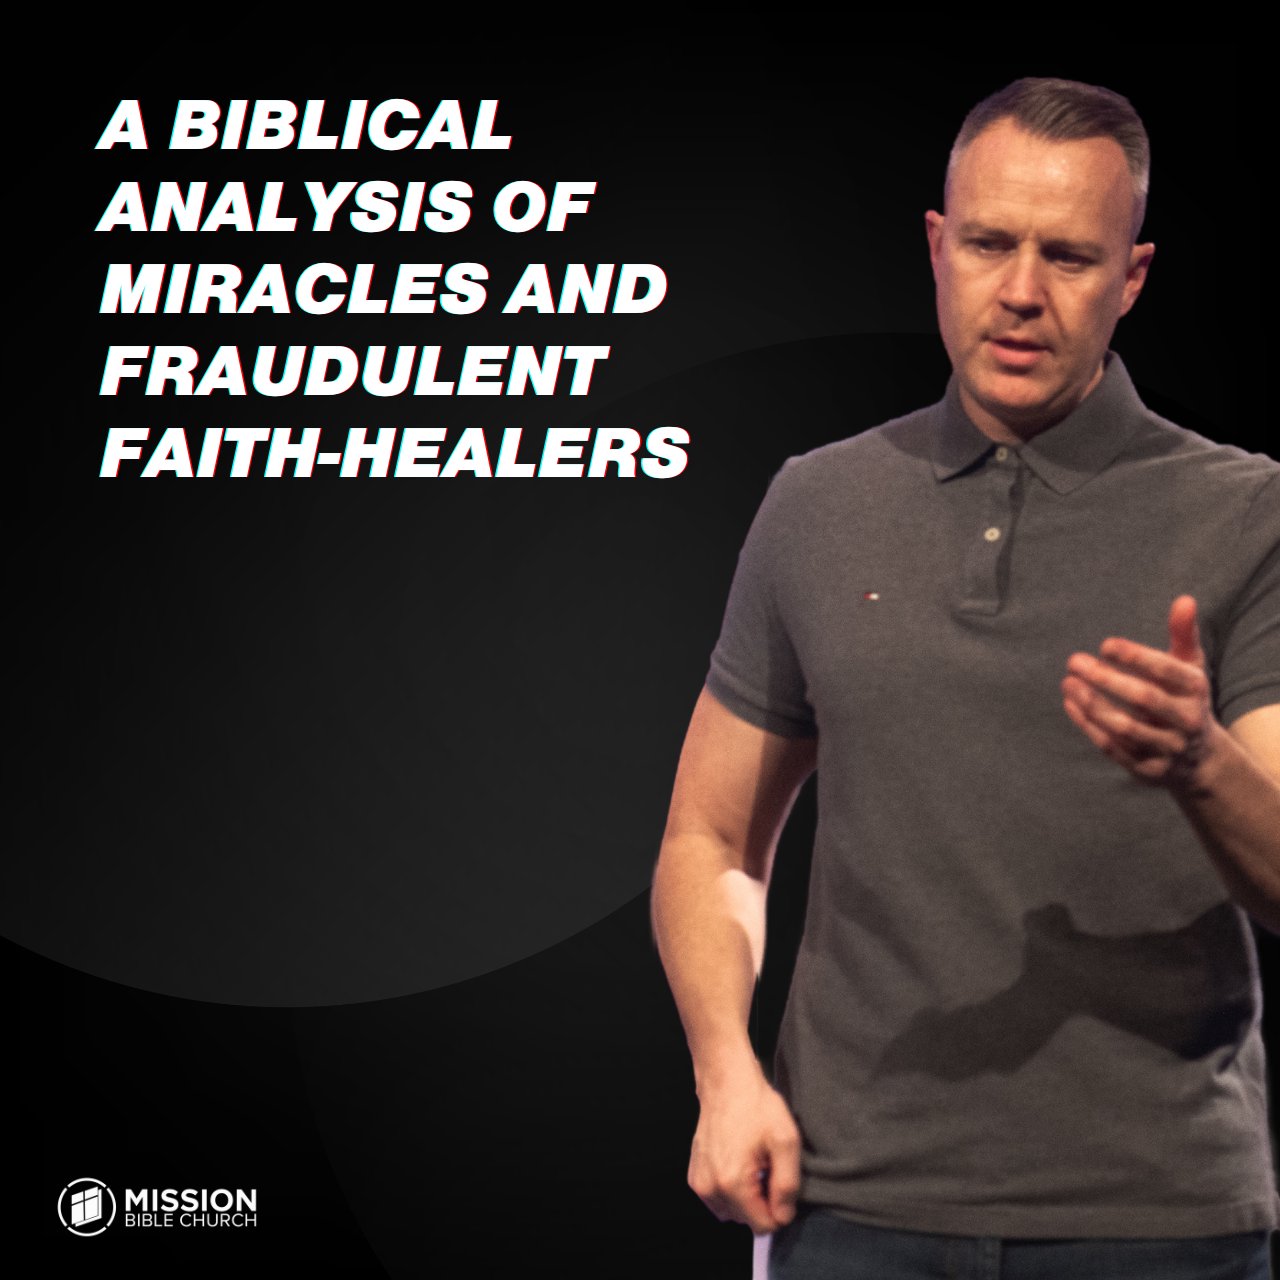 A Biblical Analysis of Miracles and Fraudulent Faith-Healers